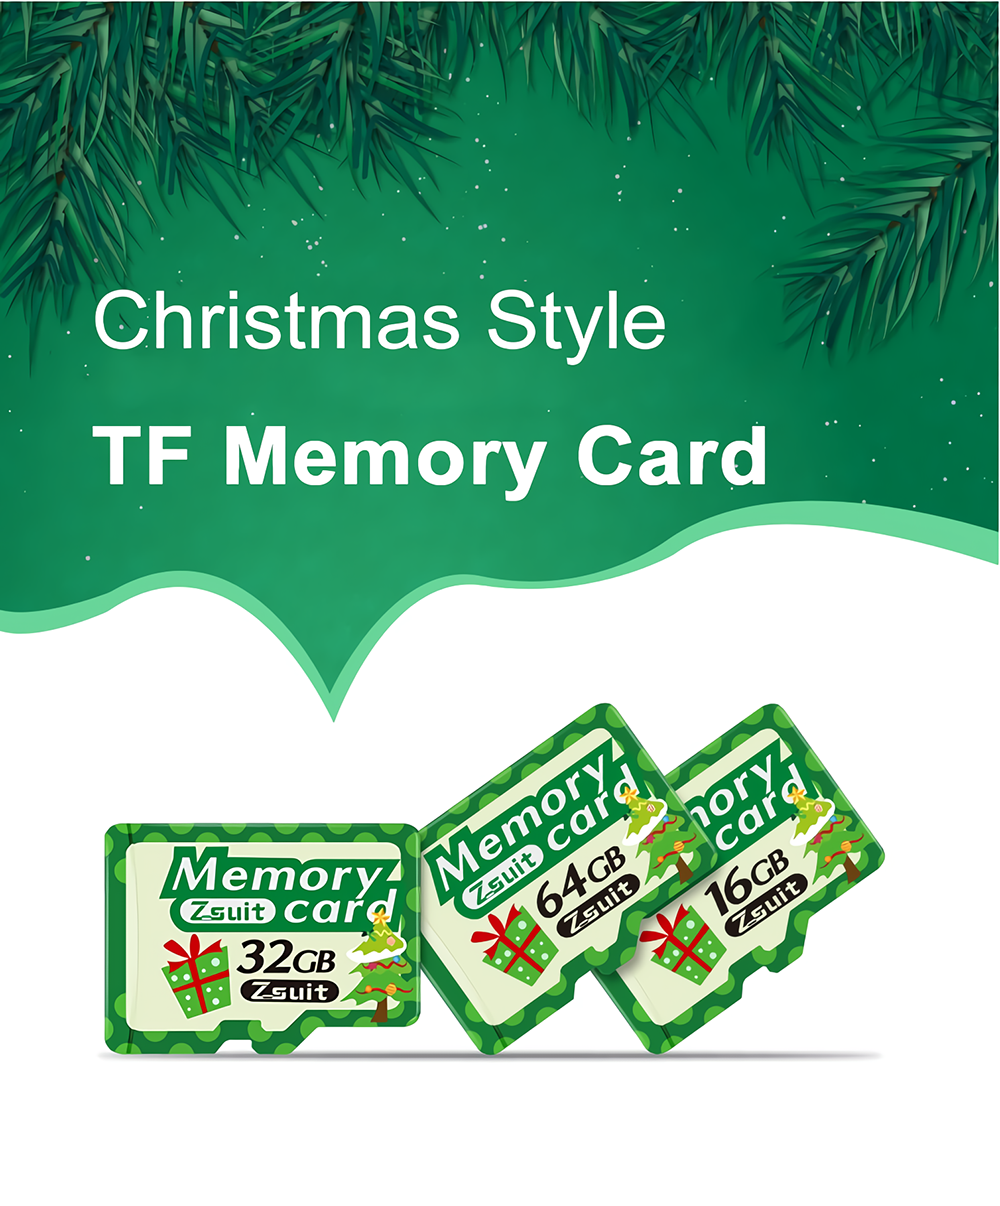 z-suit-Christmas-Style-C10-Memory-Card-U3-UHS-1-TF-Card-16G-32G-64G-High-Speed-Storage-Flash-Card-1923175-1